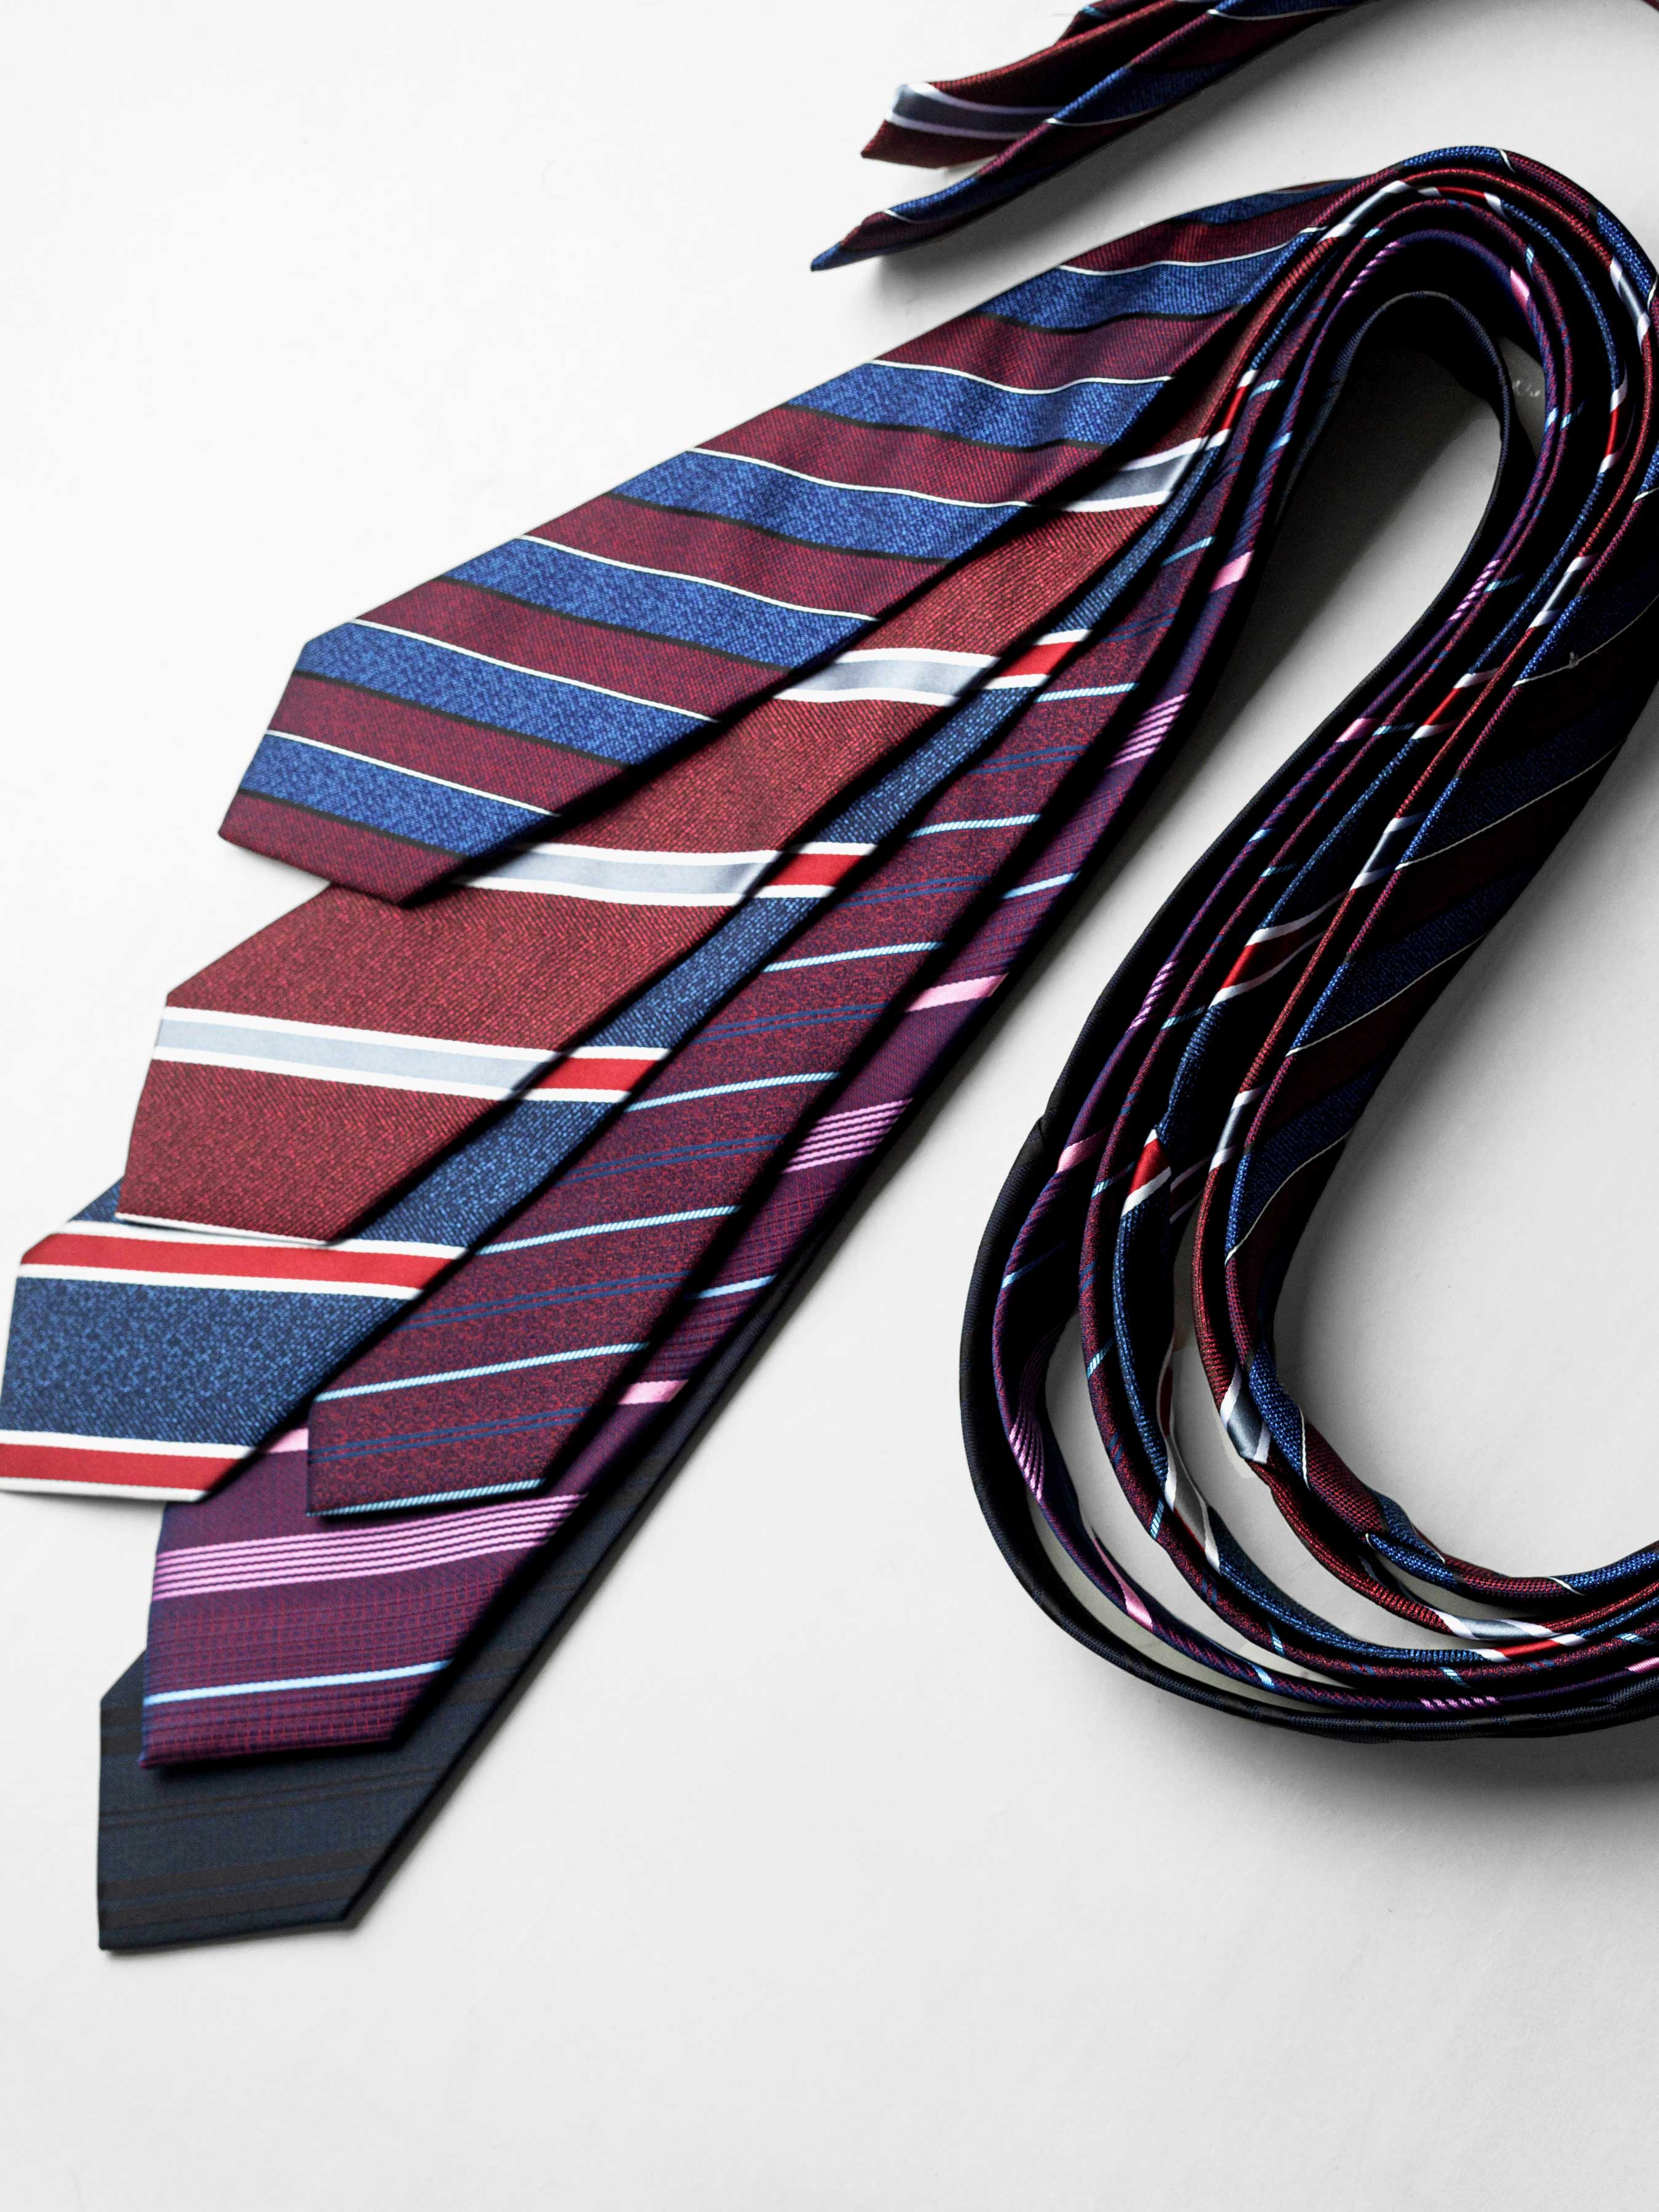 Awning Stripe Tie - Navy Blue with Maroon Line - Zeve Shoes